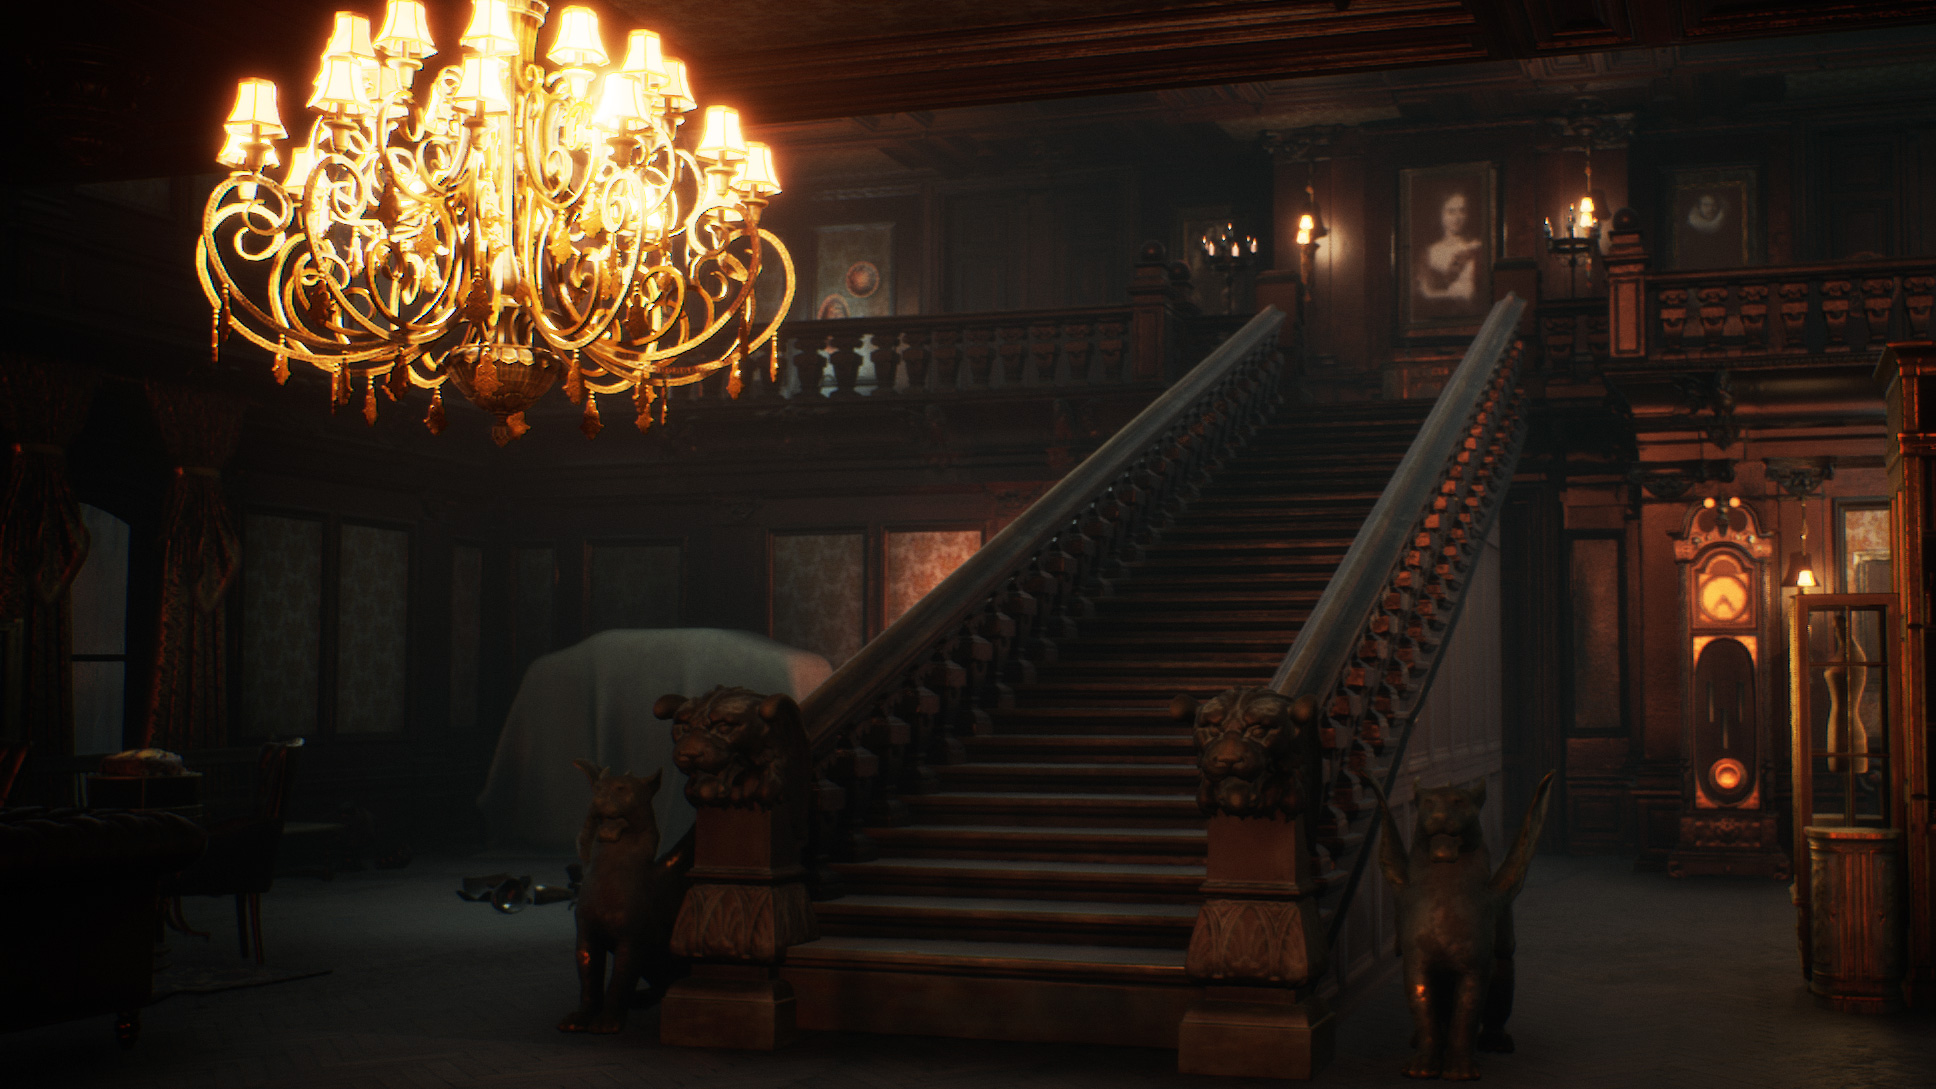 The virtual reality Haunted House mini-experience was created in Unreal Engine.,